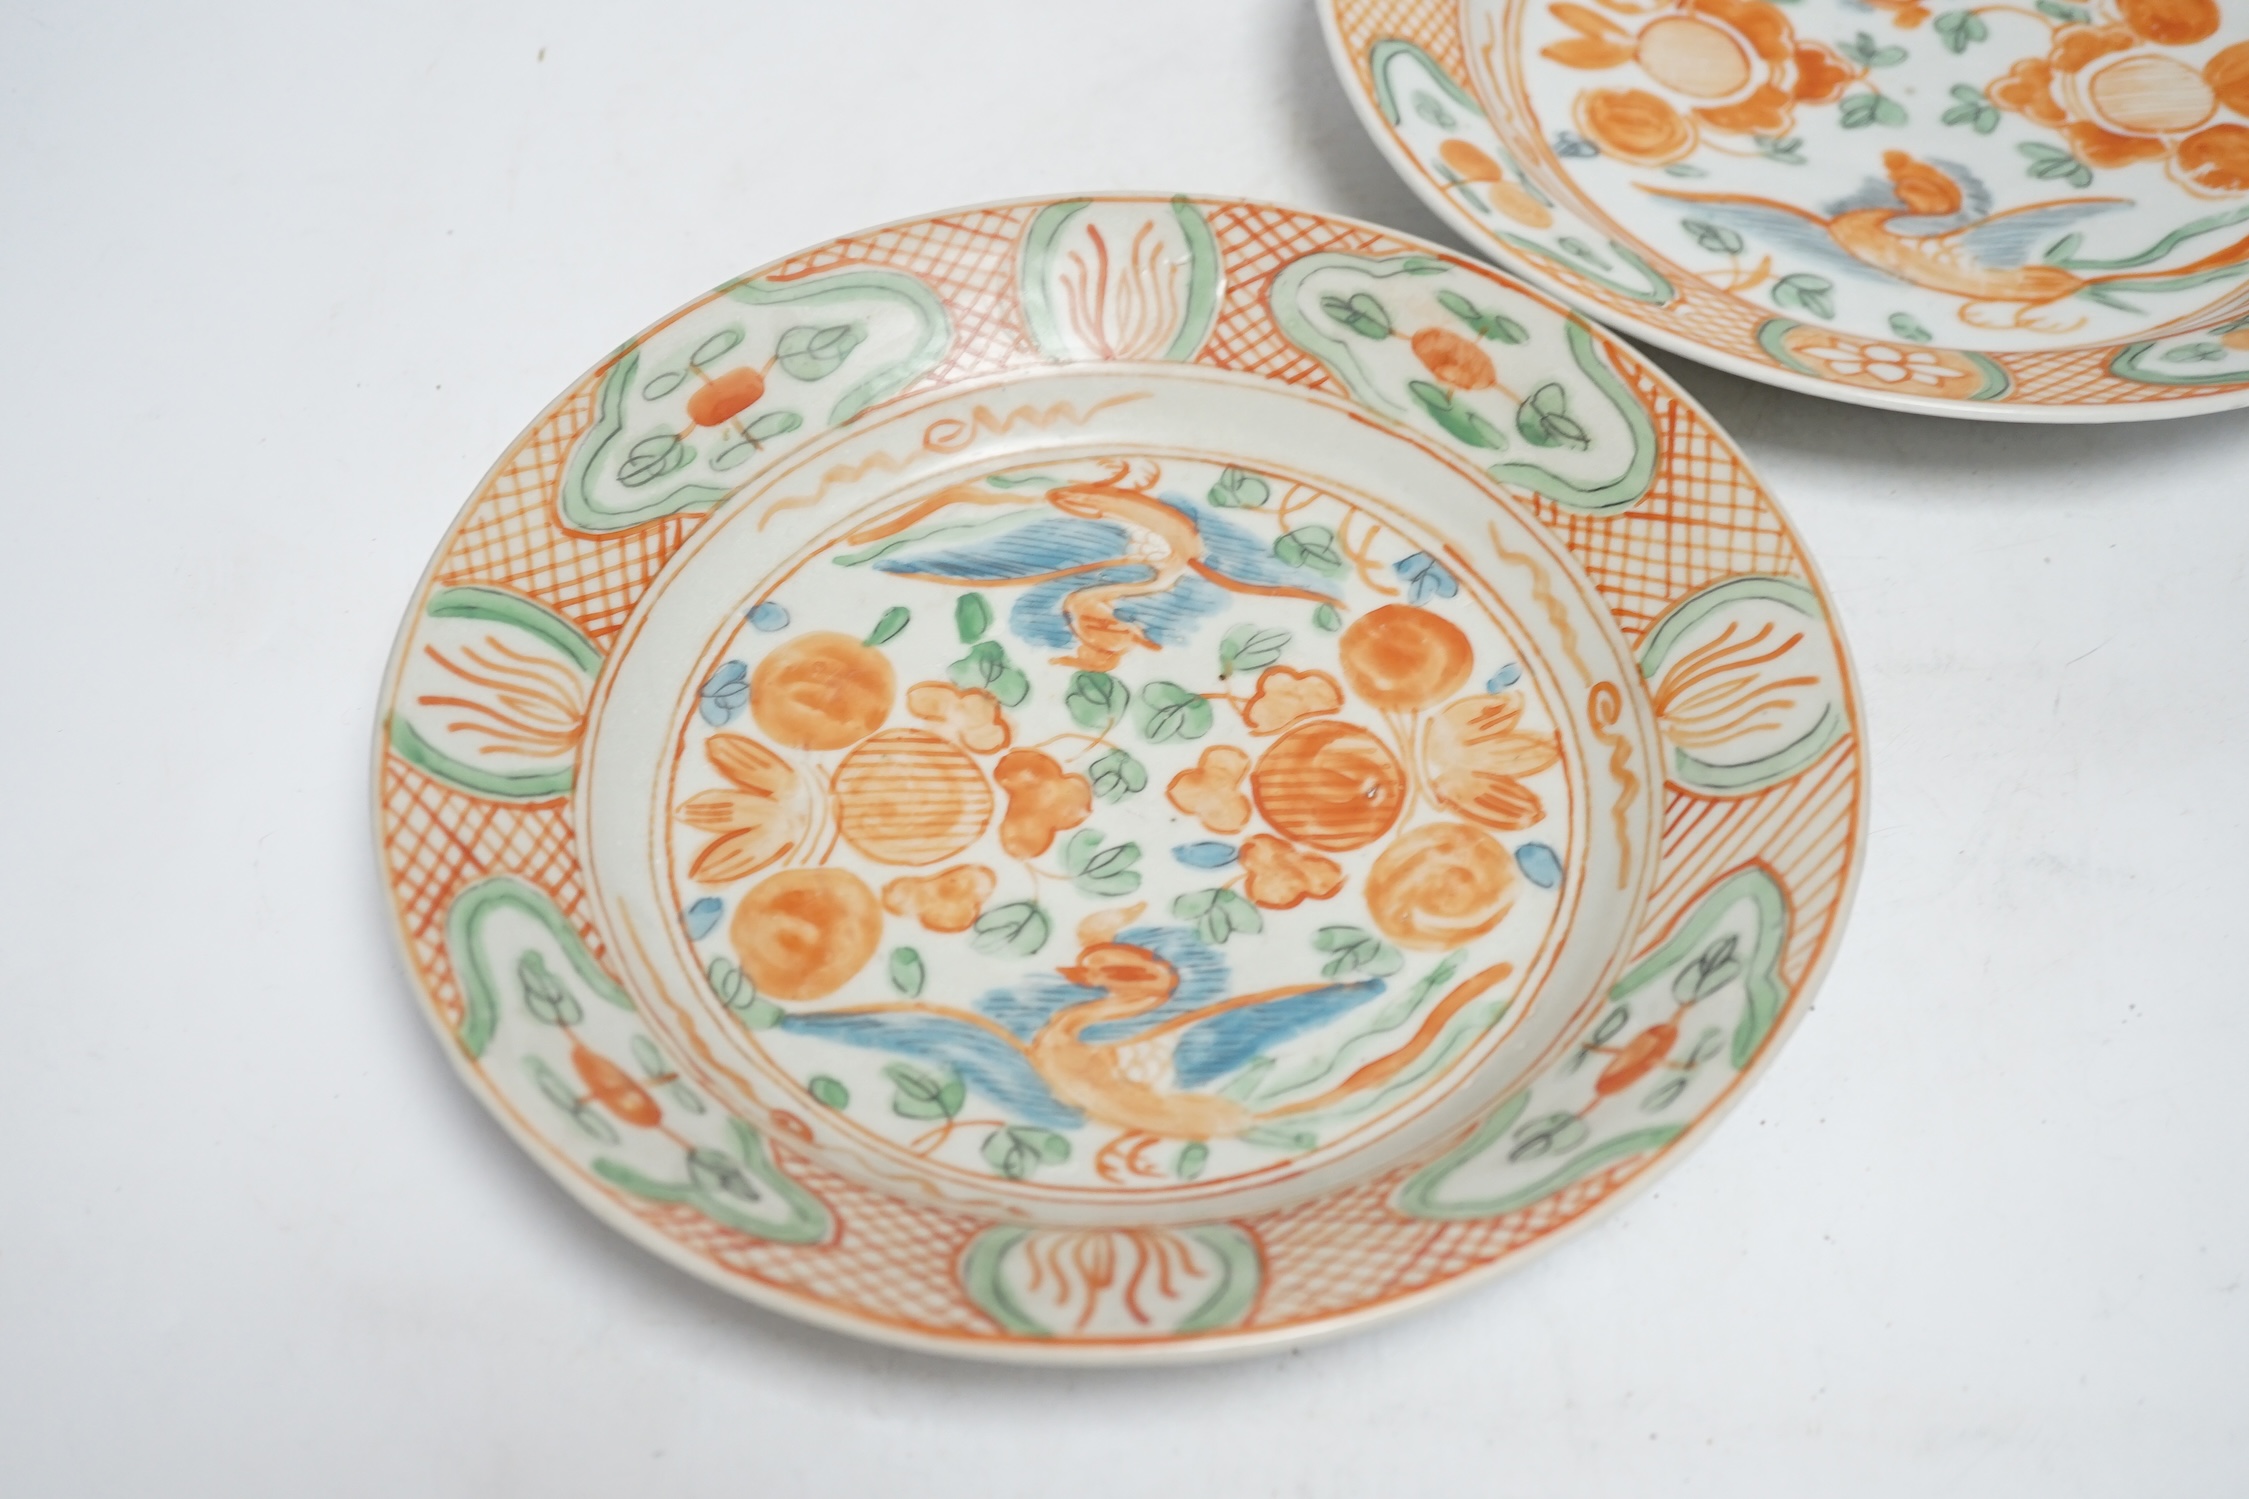 A pair of Chinese Swatow enamelled porcelain plates, late 16th century, 24cm